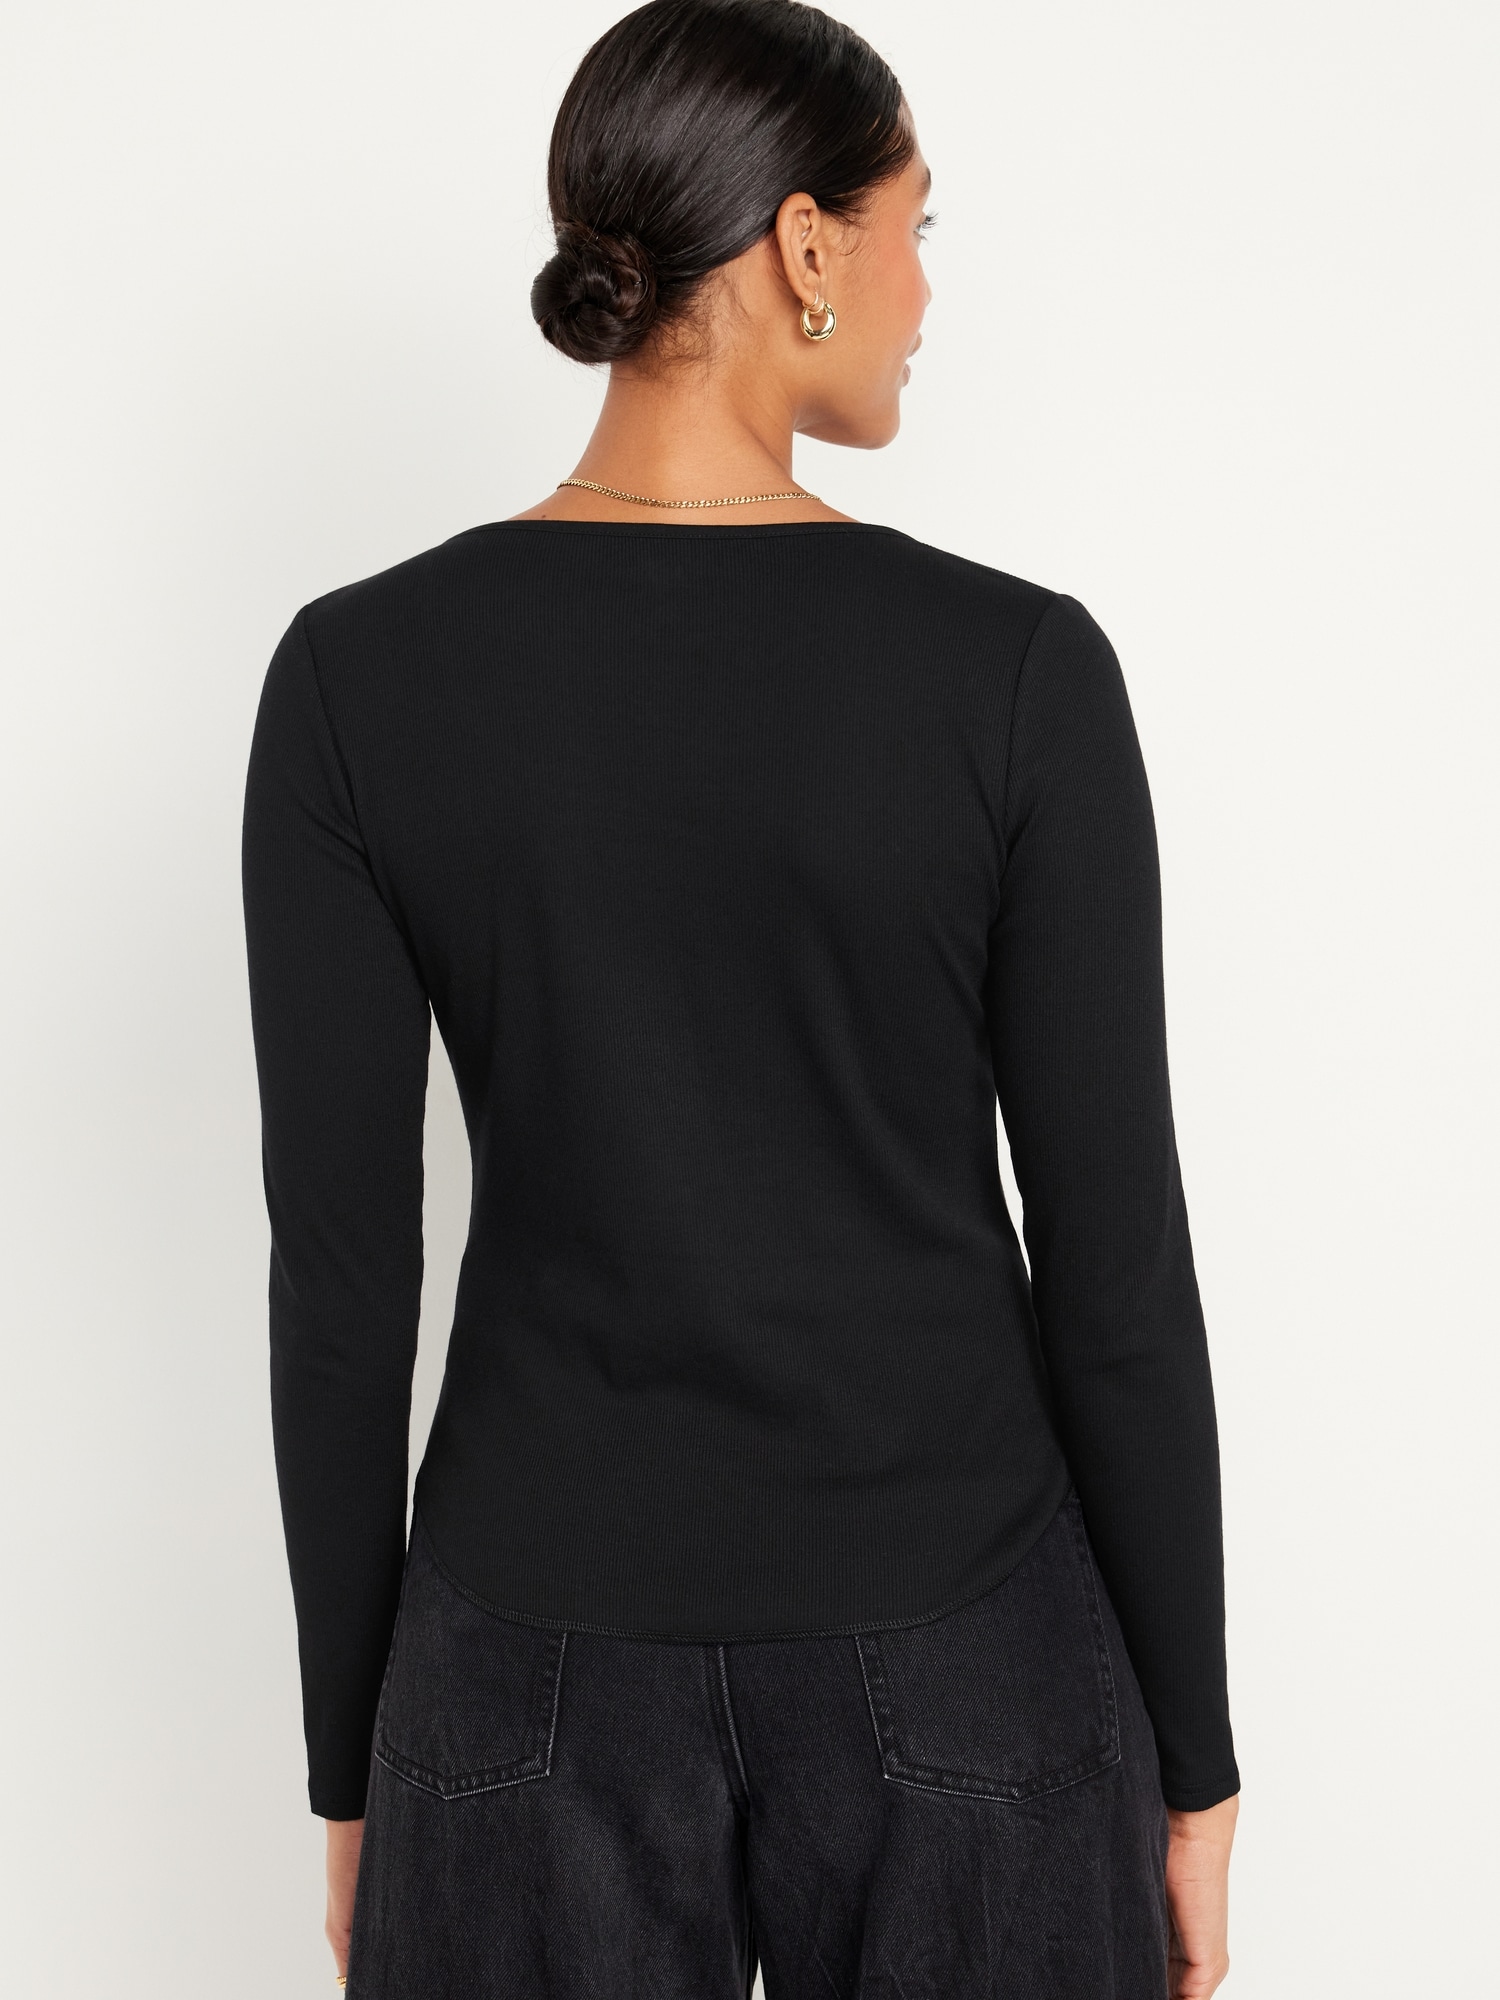 unvergesslich Fitted Long-Sleeve Rib-Knit T-Shirt for Old | Navy Women